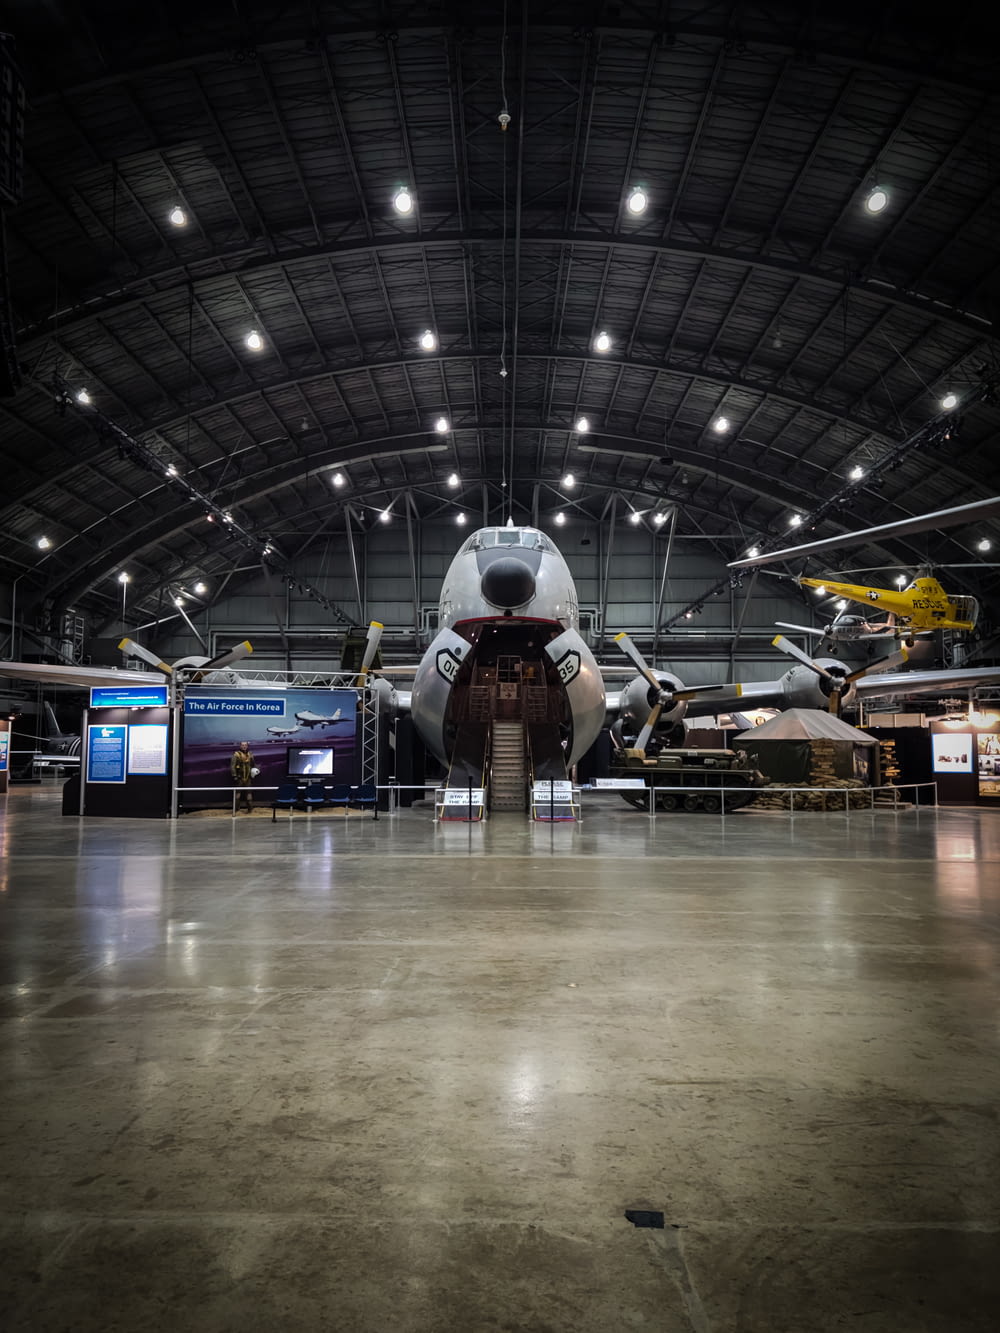 a large airplane is parked inside of a hangar